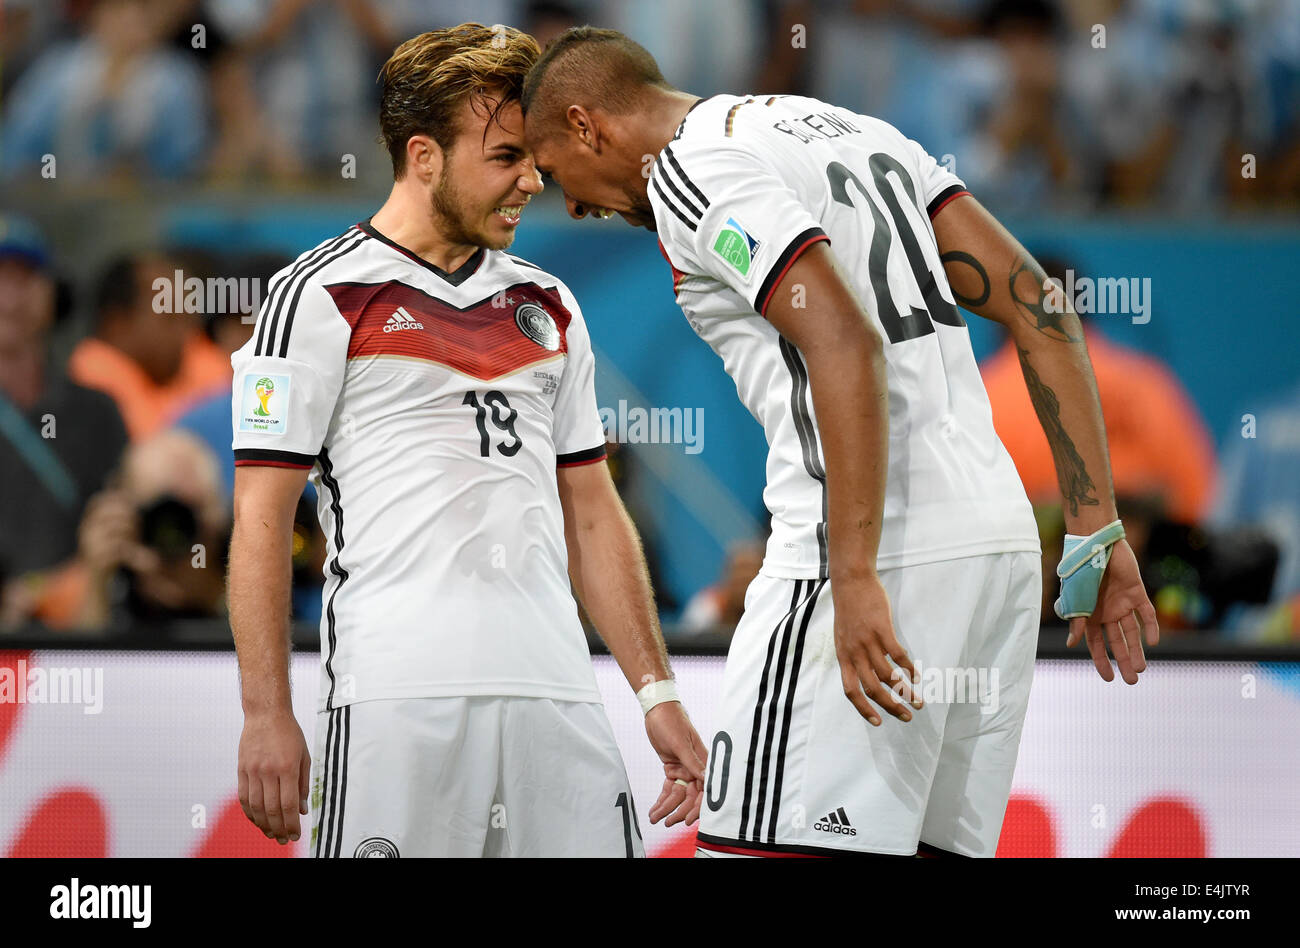 Rio de Janeiro, Brazil. 13th July, 2014. Mario Goetze (L) of Germany celebrates with teammate Jerome Boateng after scoring 1-0 goal during the FIFA World Cup 2014 final soccer match between Germany and Argentina at the Estadio do Maracana in Rio de Janeiro, Brazil, 13 July 2014. Photo: Marcus Brandt/dpa/Alamy Live News Stock Photo